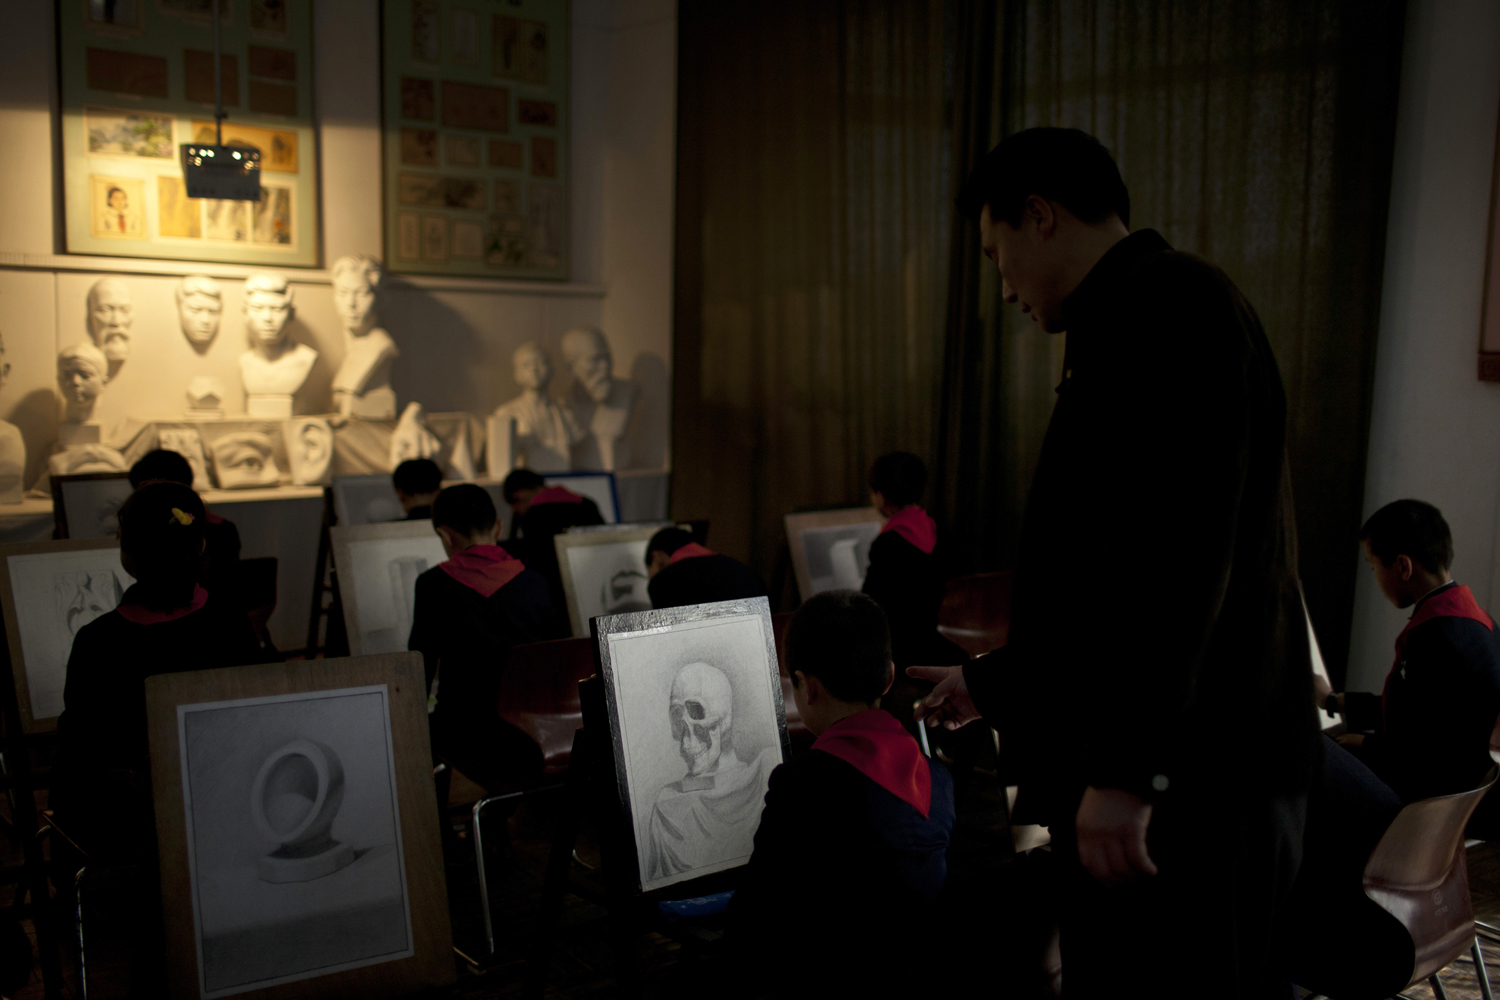 April 18, 2013. A teacher instructs during a drawing class at Mangyongdae Children's Palace in Pyongyang, North Korea.